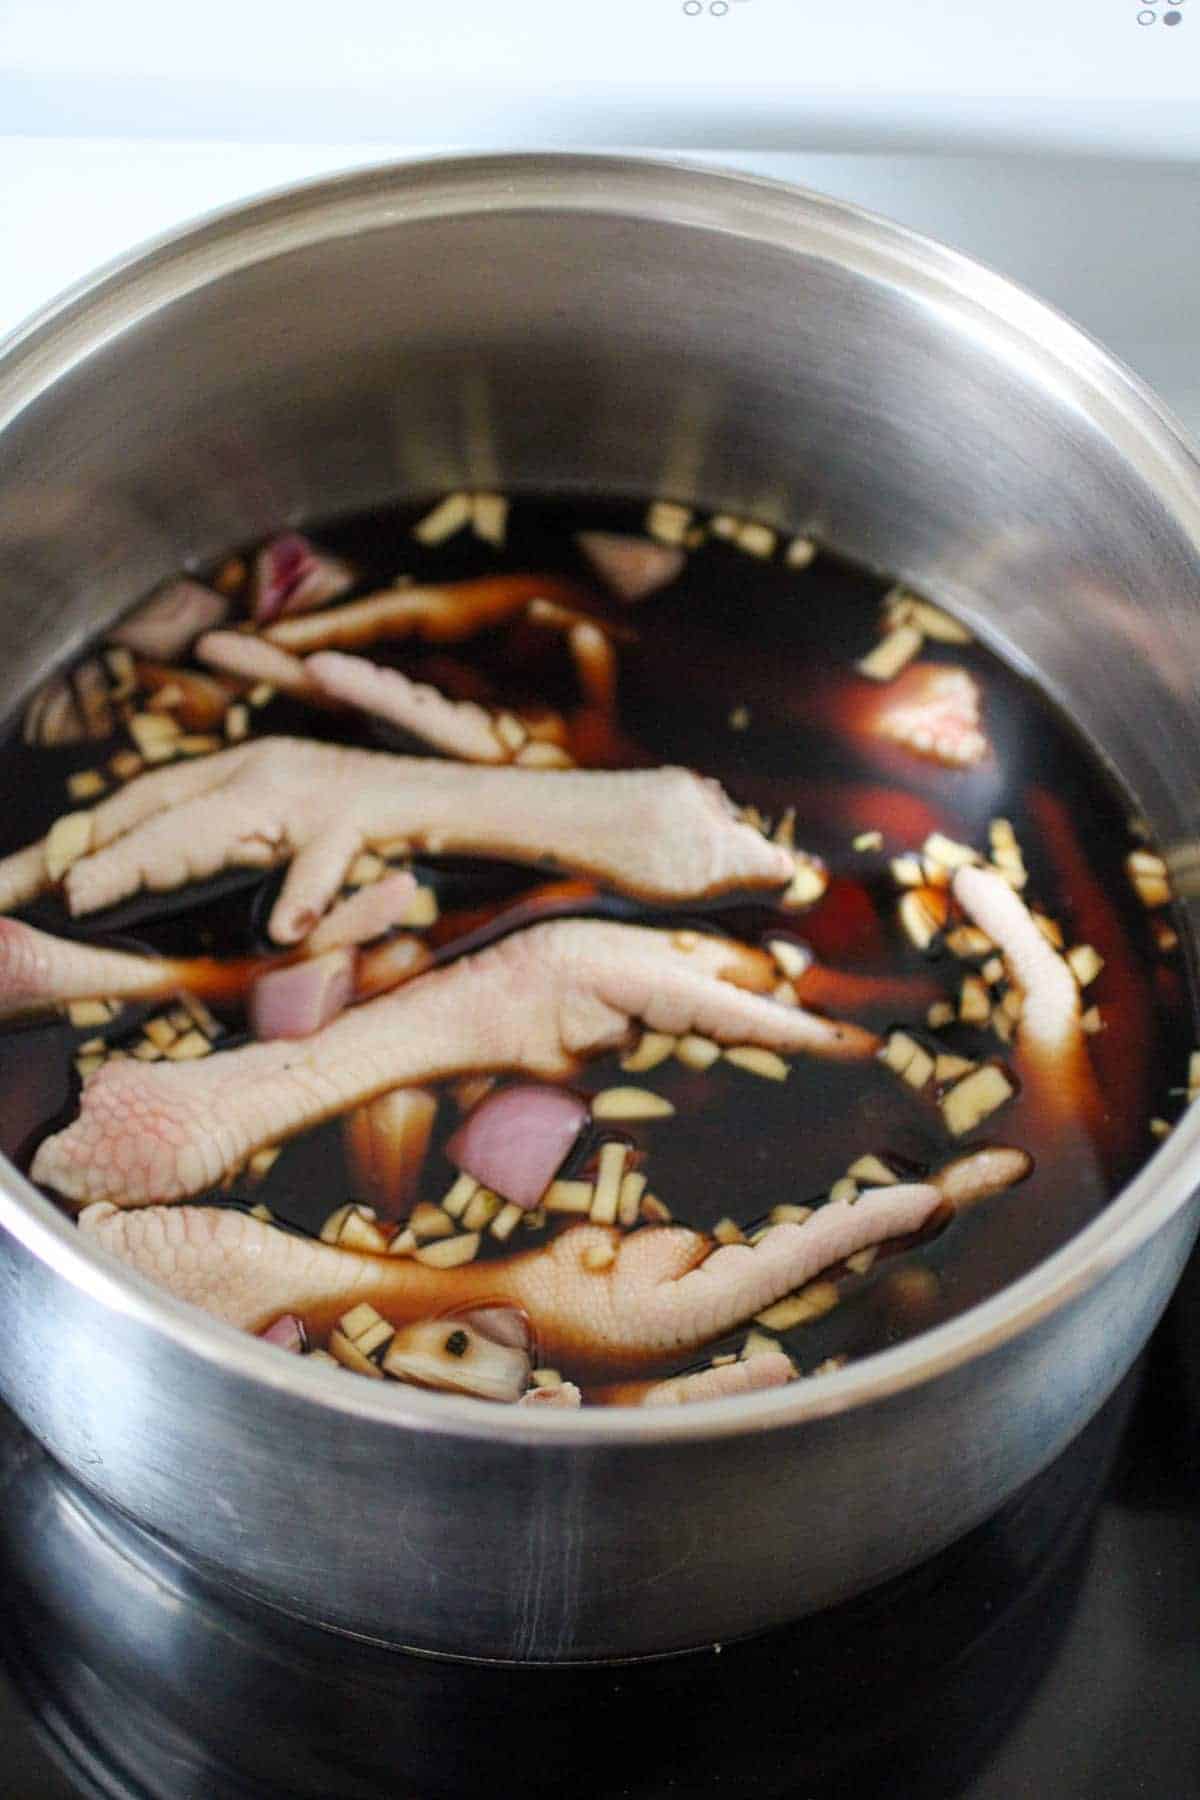 chicken paws in a pot of soy sauce, vinegar, minced garlic, and chopped onions